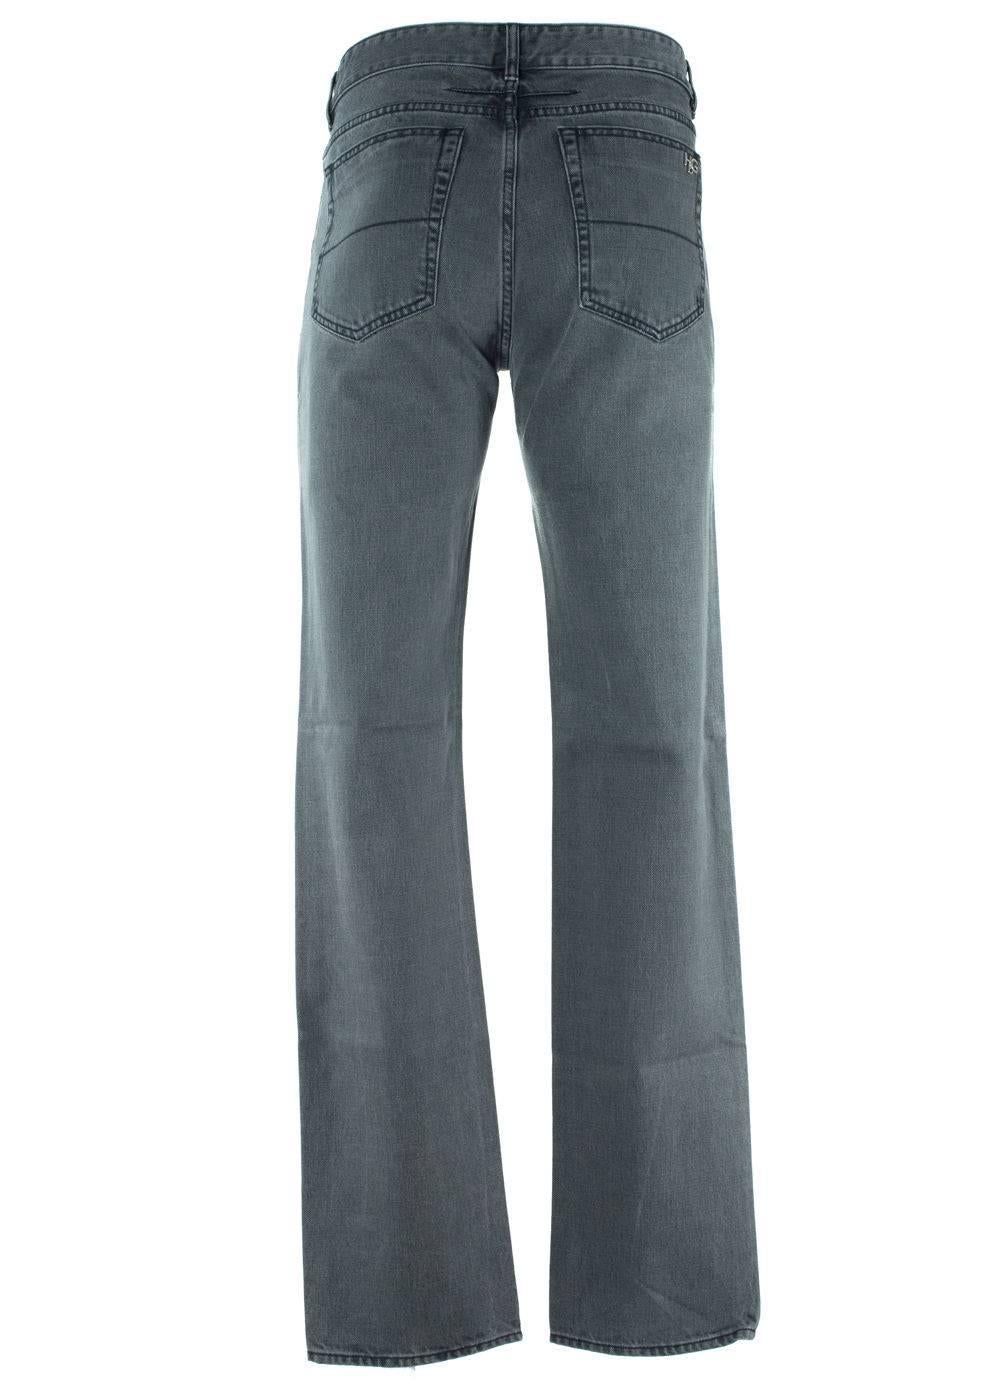 Brand New Givenchy Men's Jeans
Original Tag
Retails in Stores & Online for $580
Men's Size US32 Fits True to Size

Givenchy's classic gray simplistic cotton jeans. Suitable for all seasons, weather and occasions with its classic silhouette. Made